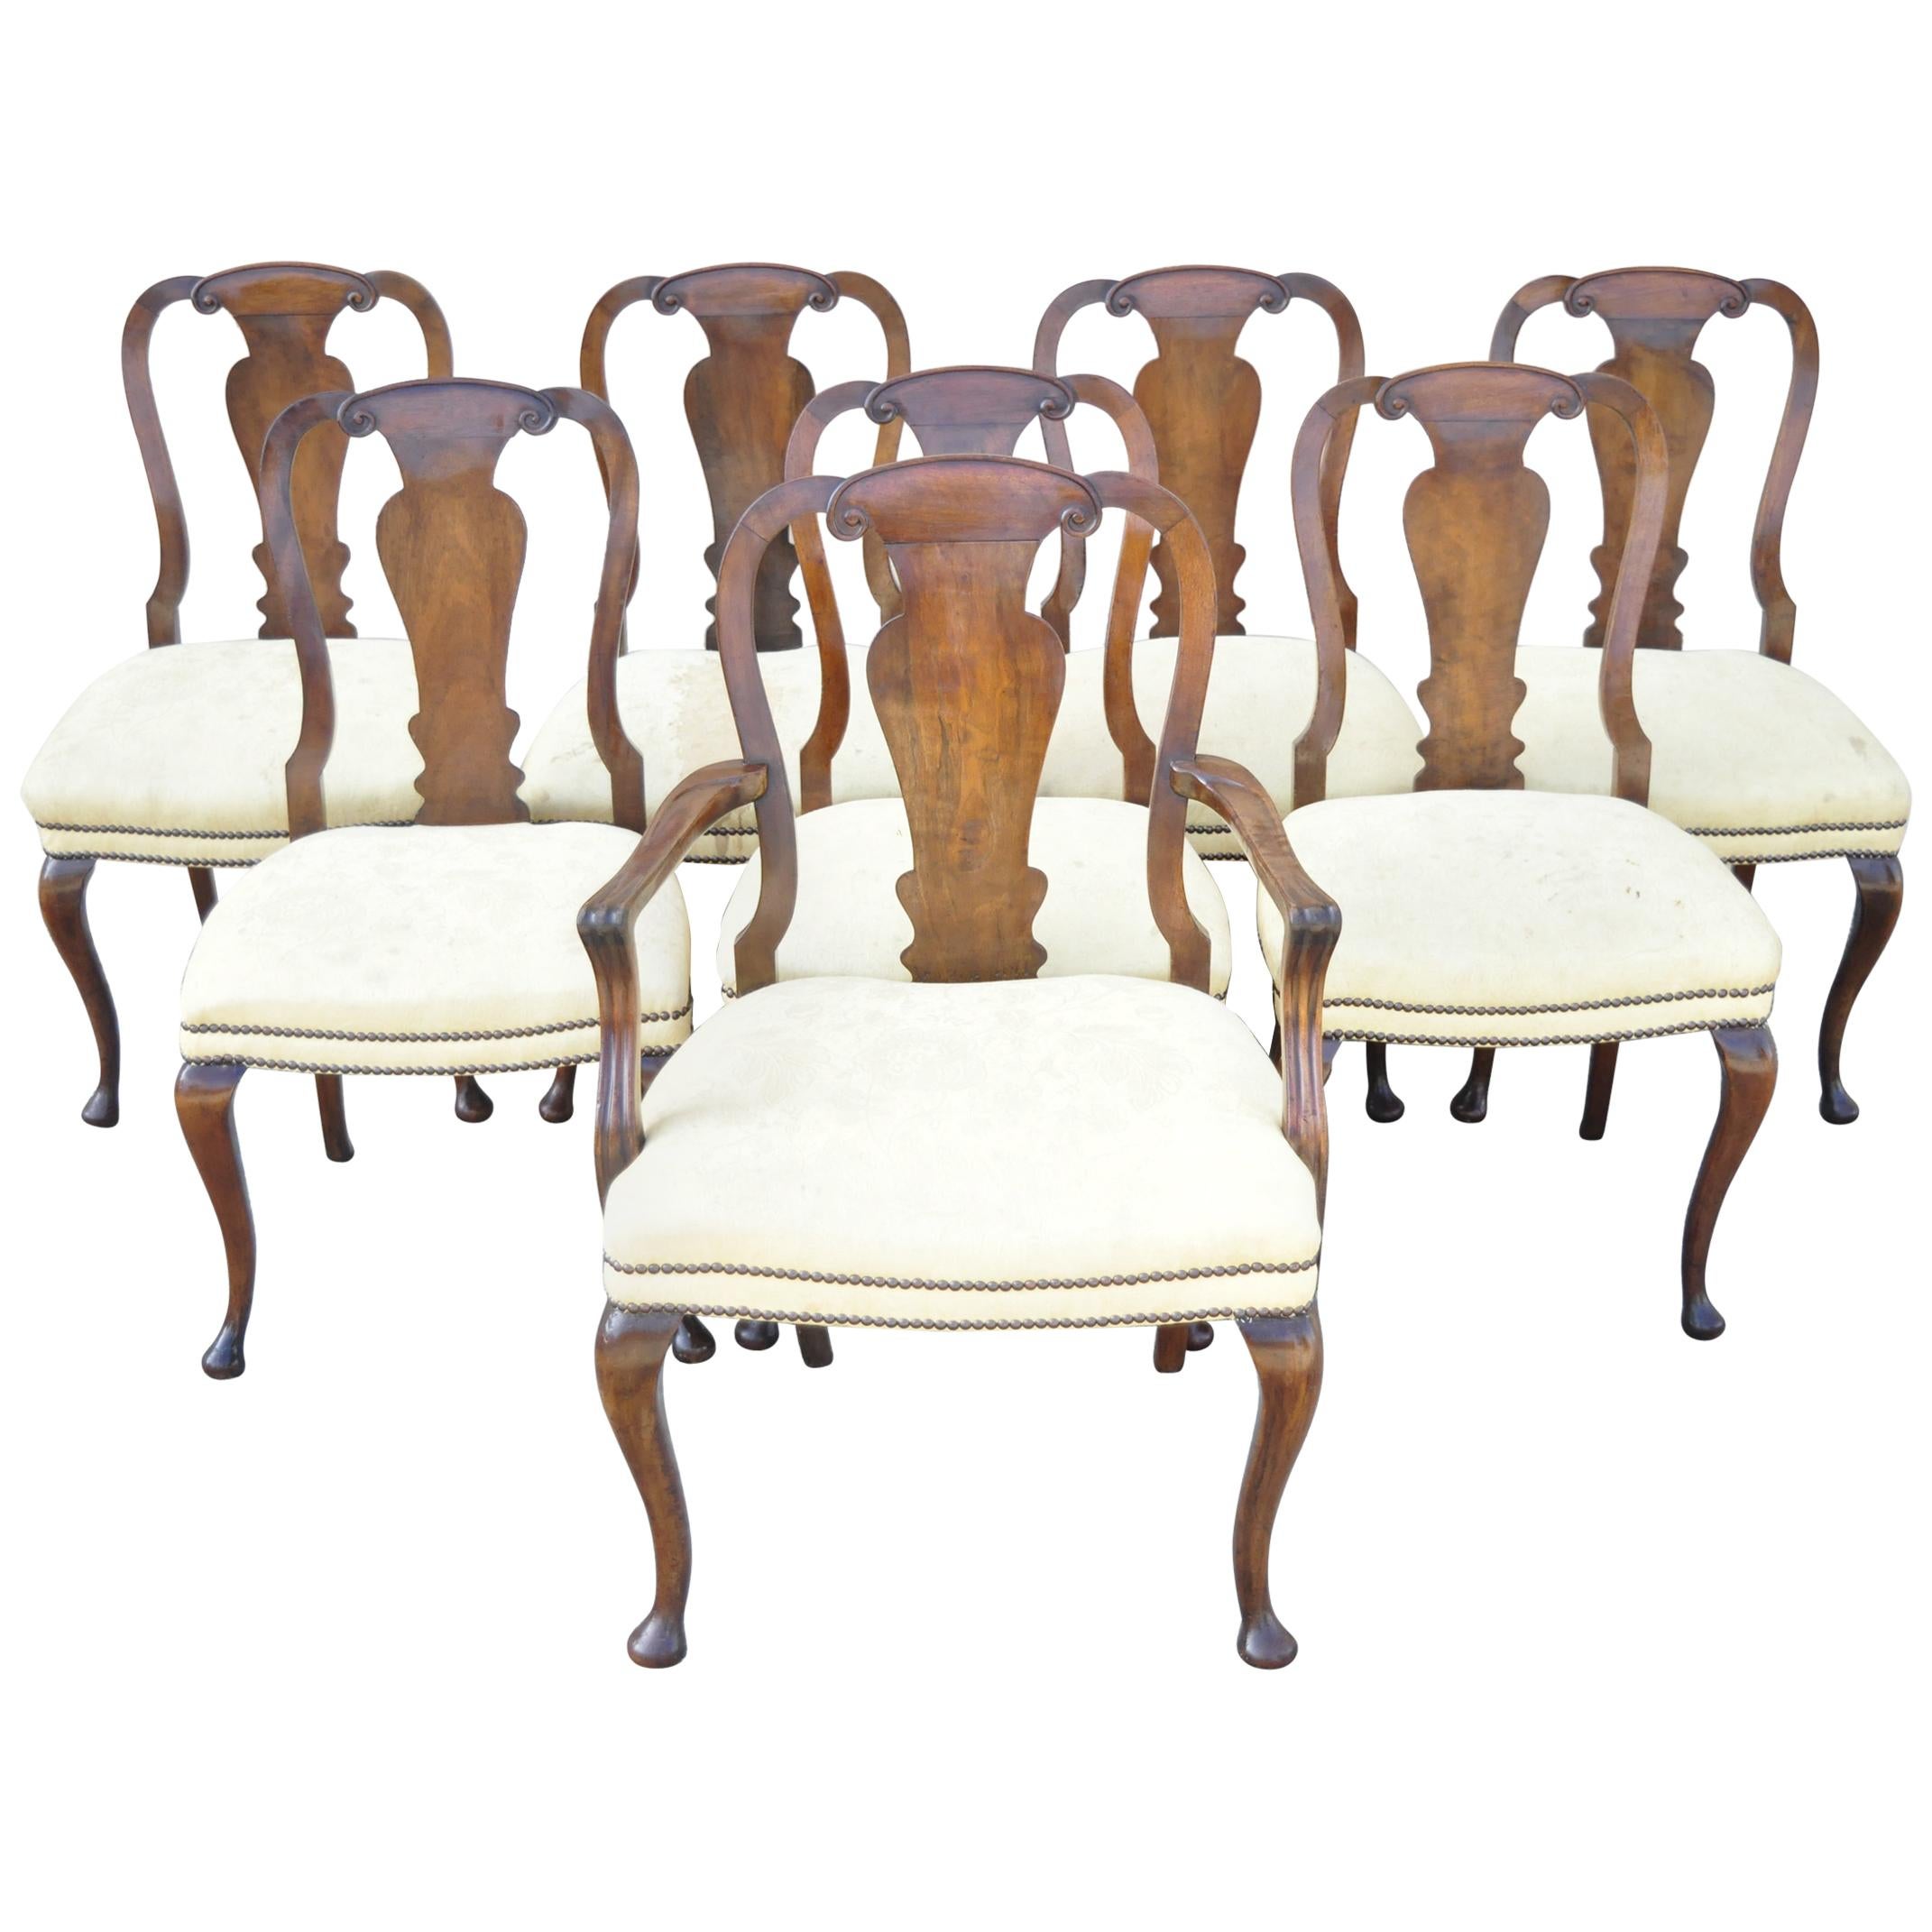 Antique 19th century English queen Anne burr walnut splat back dining chairs - set of 8. Set includes (7) side chairs, (1) armchair, remarkable aged patina, shapely queen Anne legs, solid wood frame, beautiful wood grain. Believed to be late